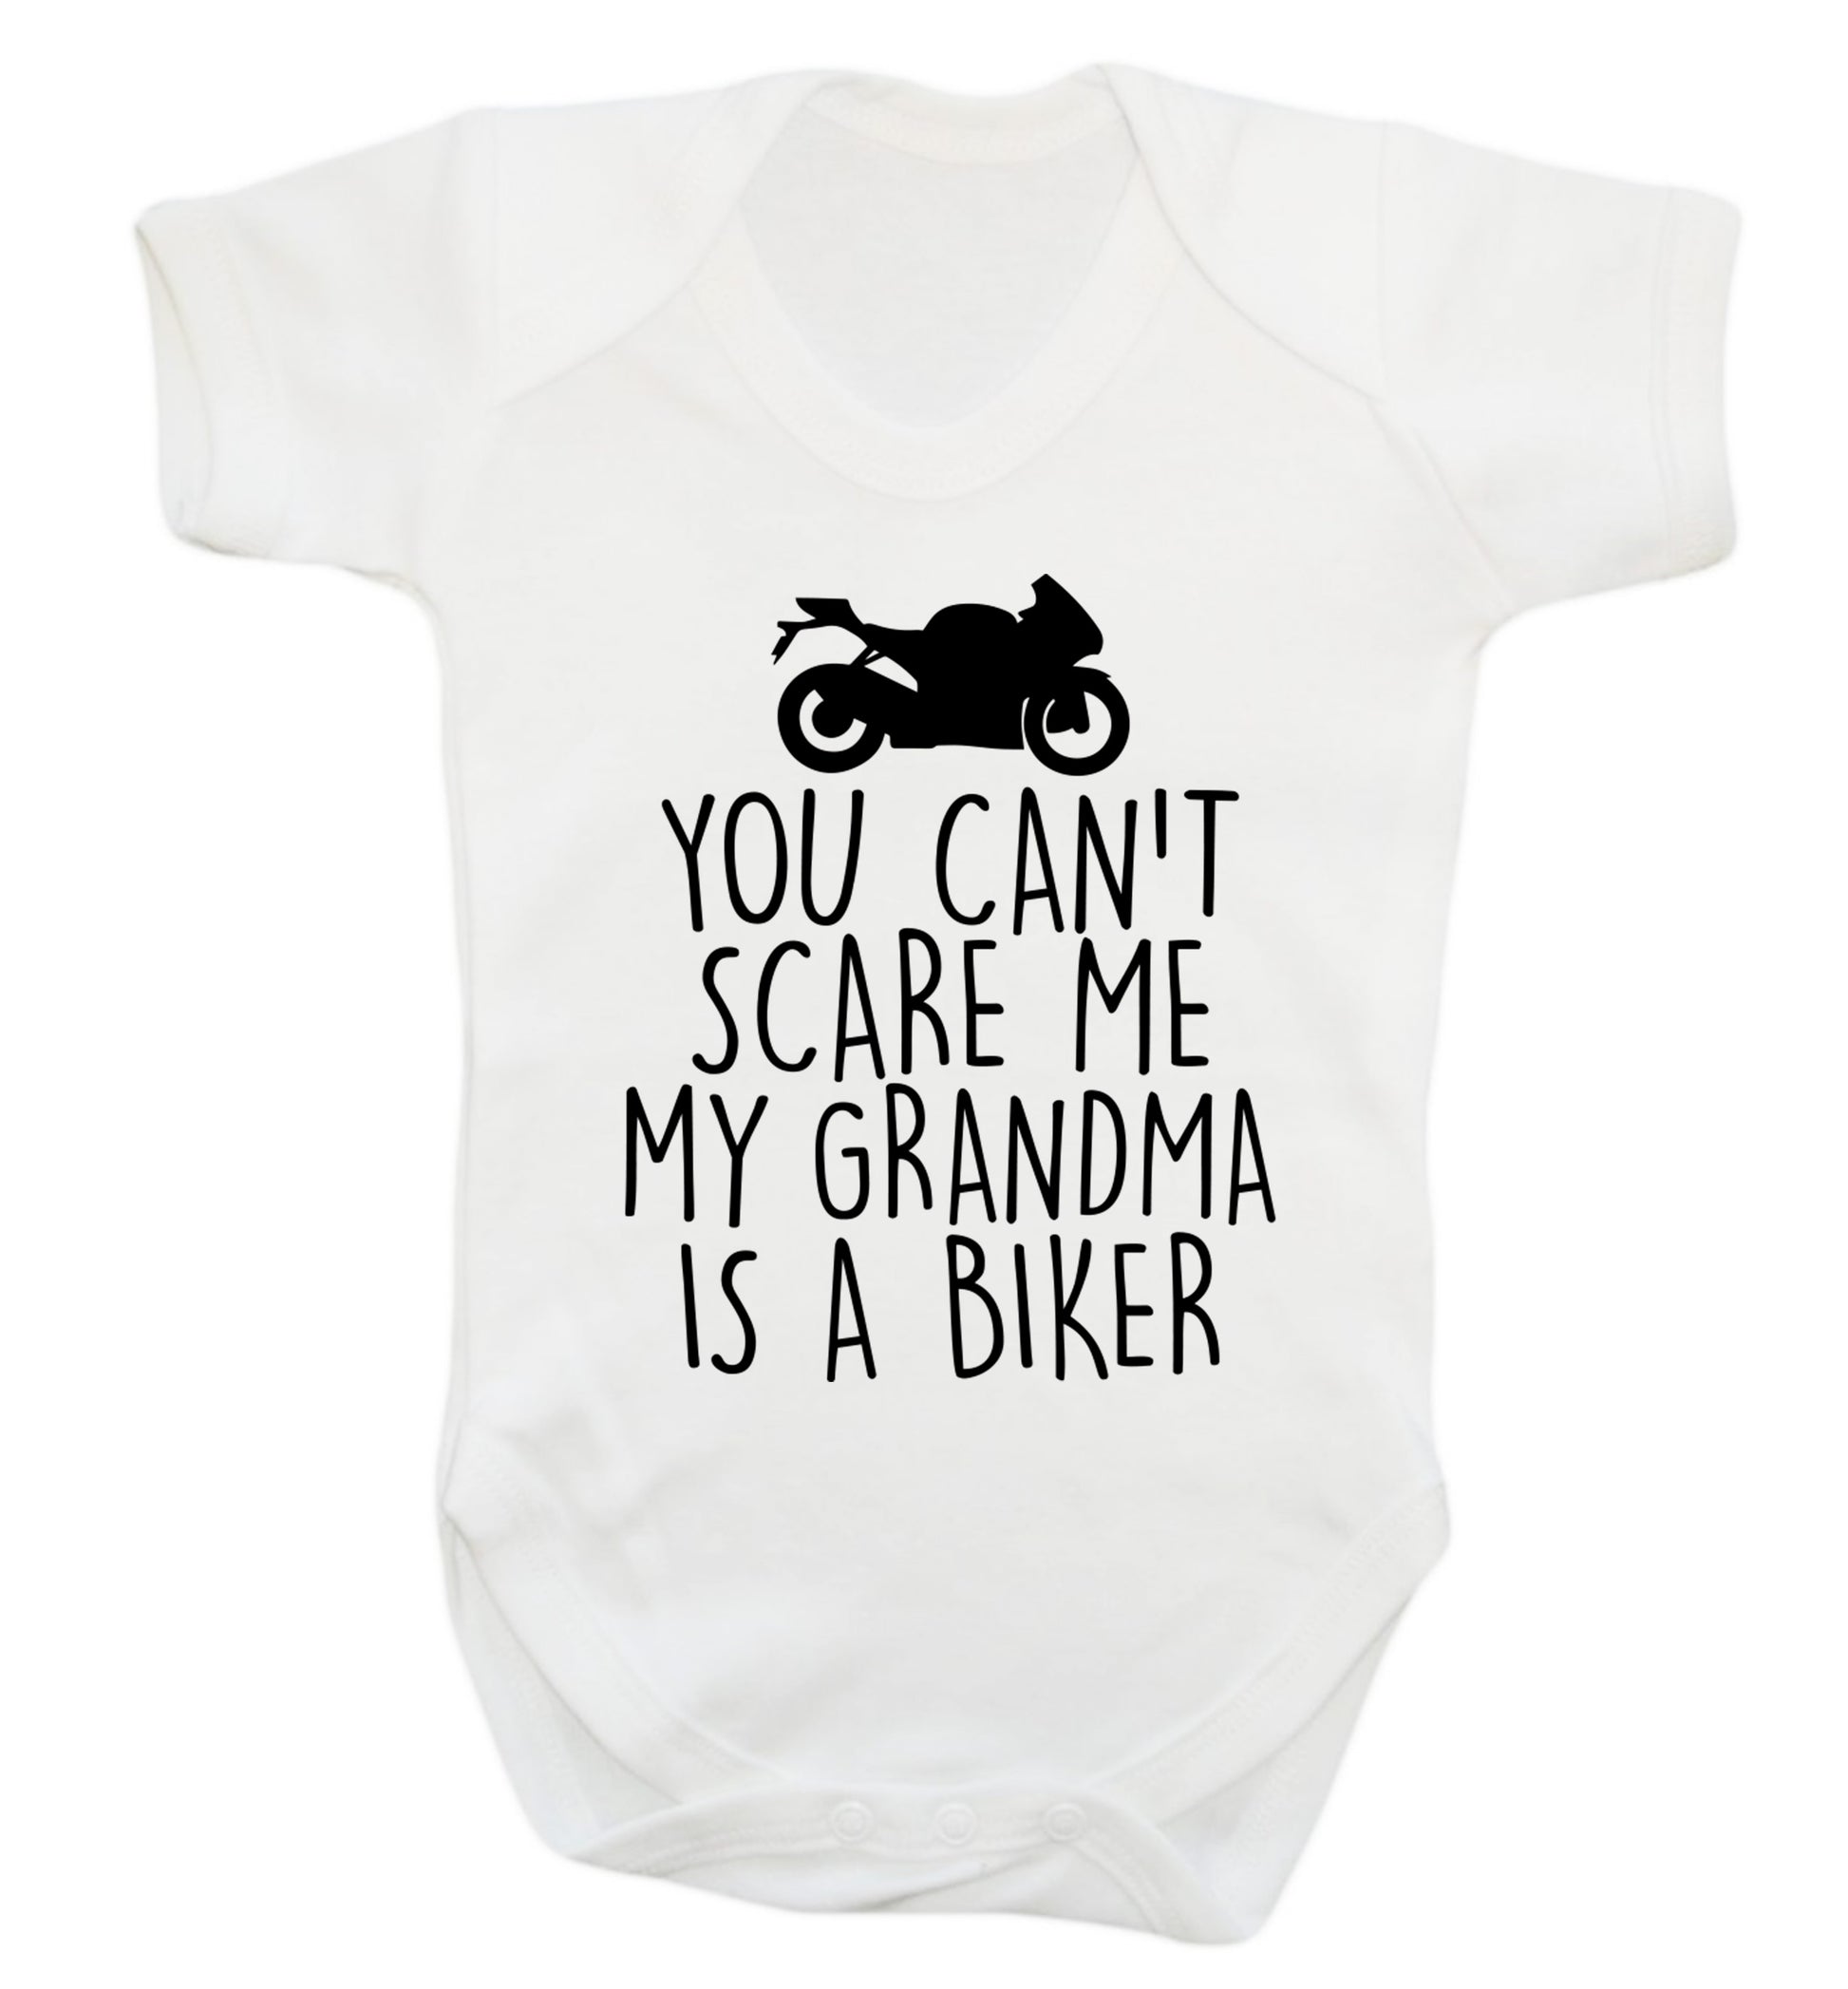 You can't scare me my grandma is a biker Baby Vest white 18-24 months